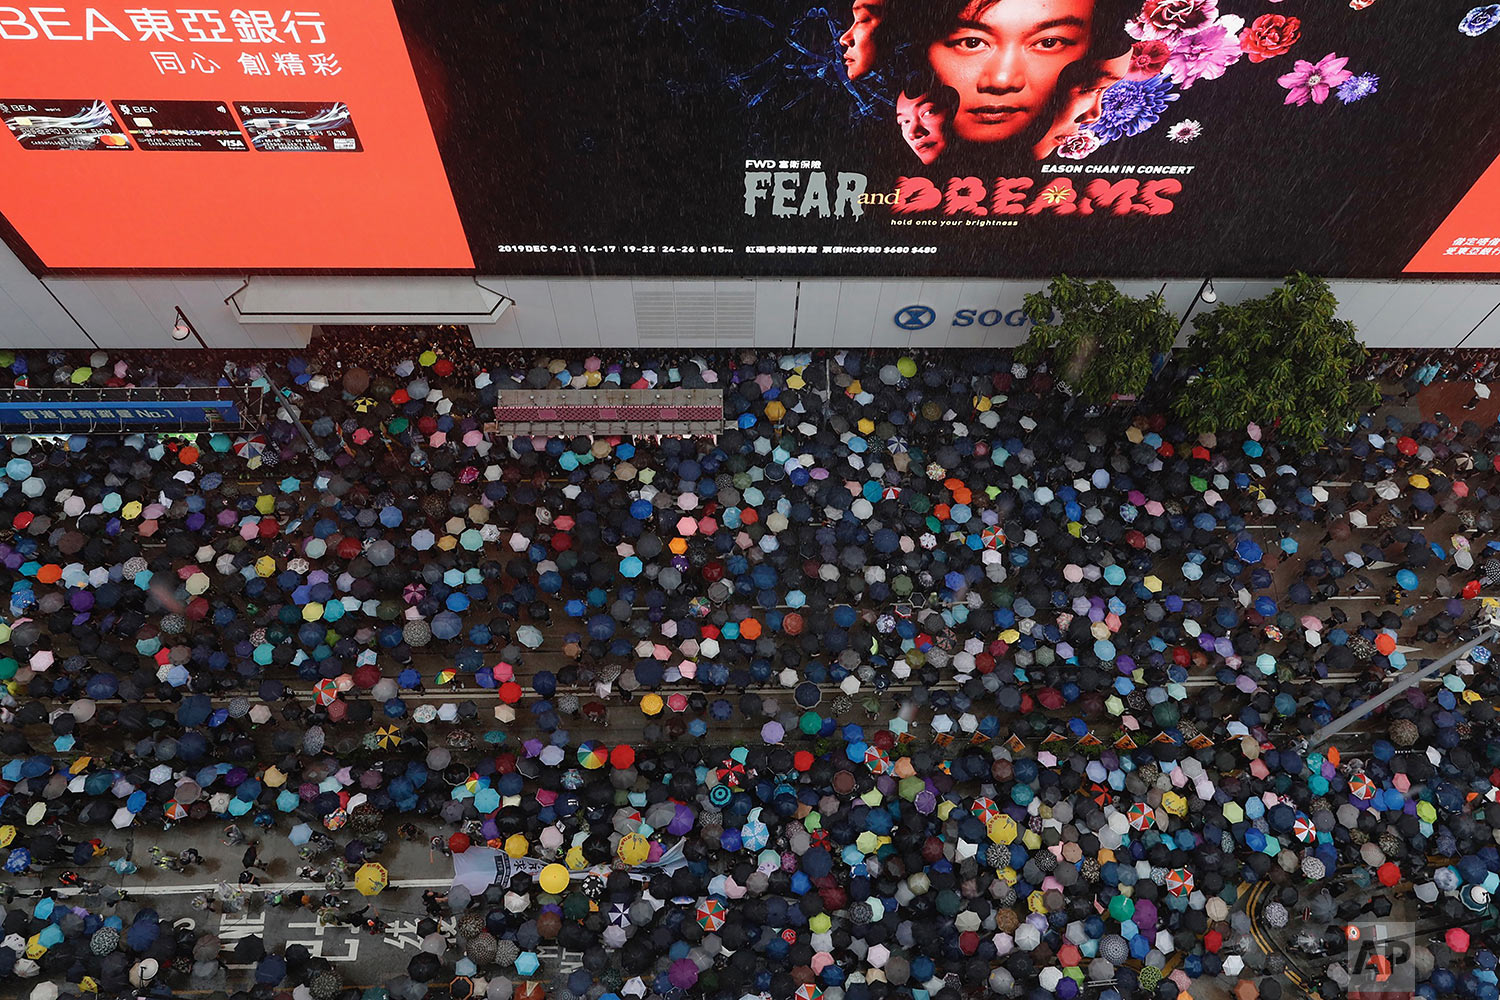  Demonstrators carry umbrellas as they march along a street in Hong Kong, Sunday, Aug. 18, 2019. (AP Photo/Vincent Yu) 